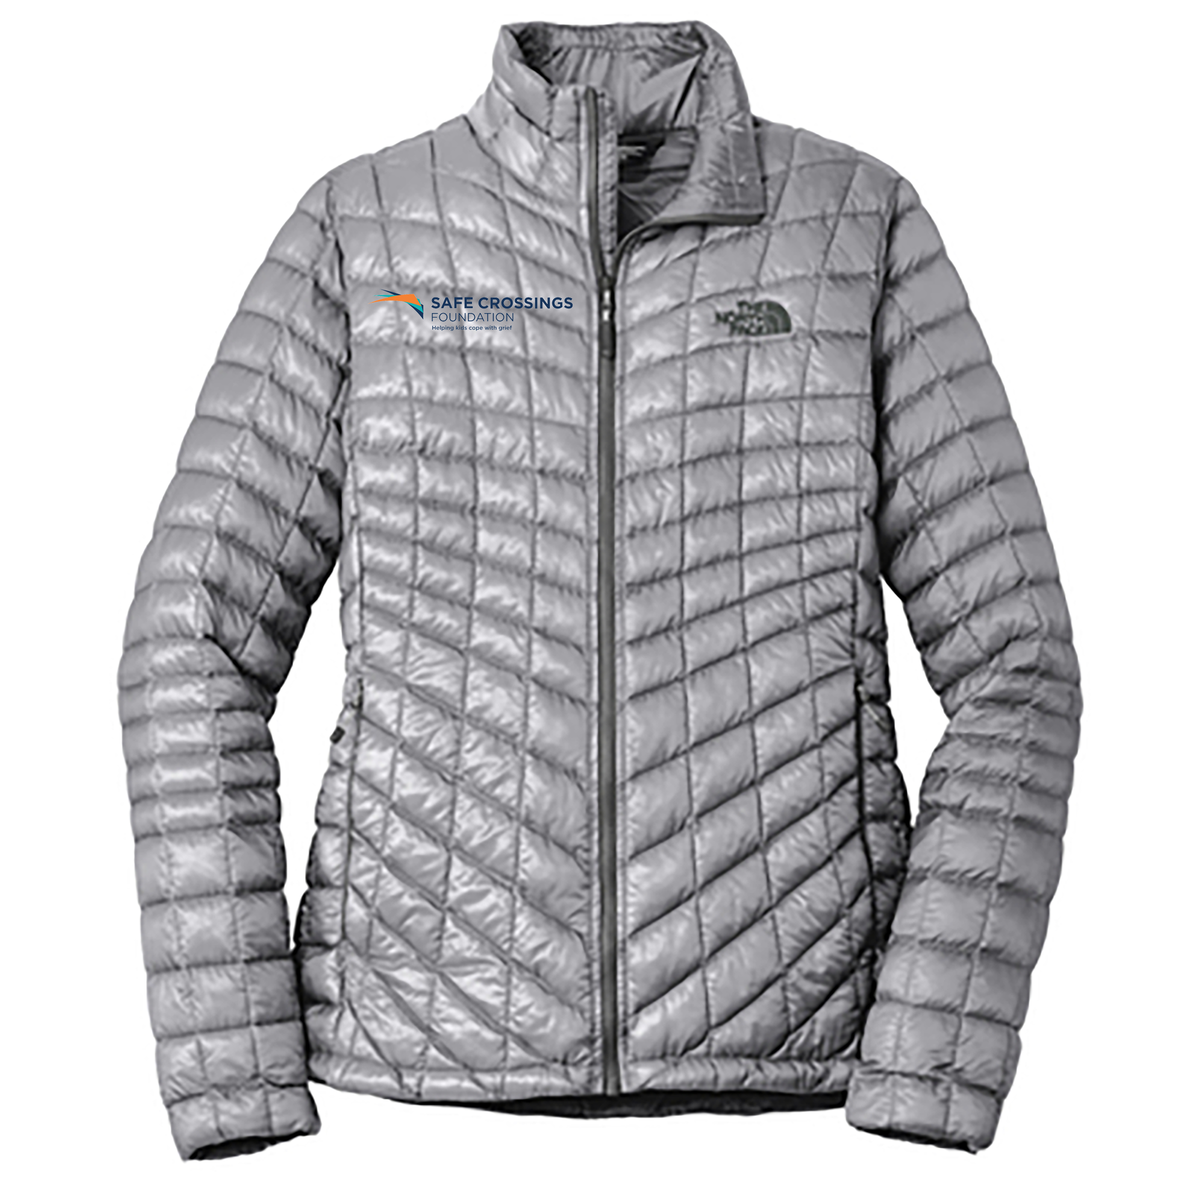 Safe Crossings Foundation The North Face Ladies ThermoBall Jacket